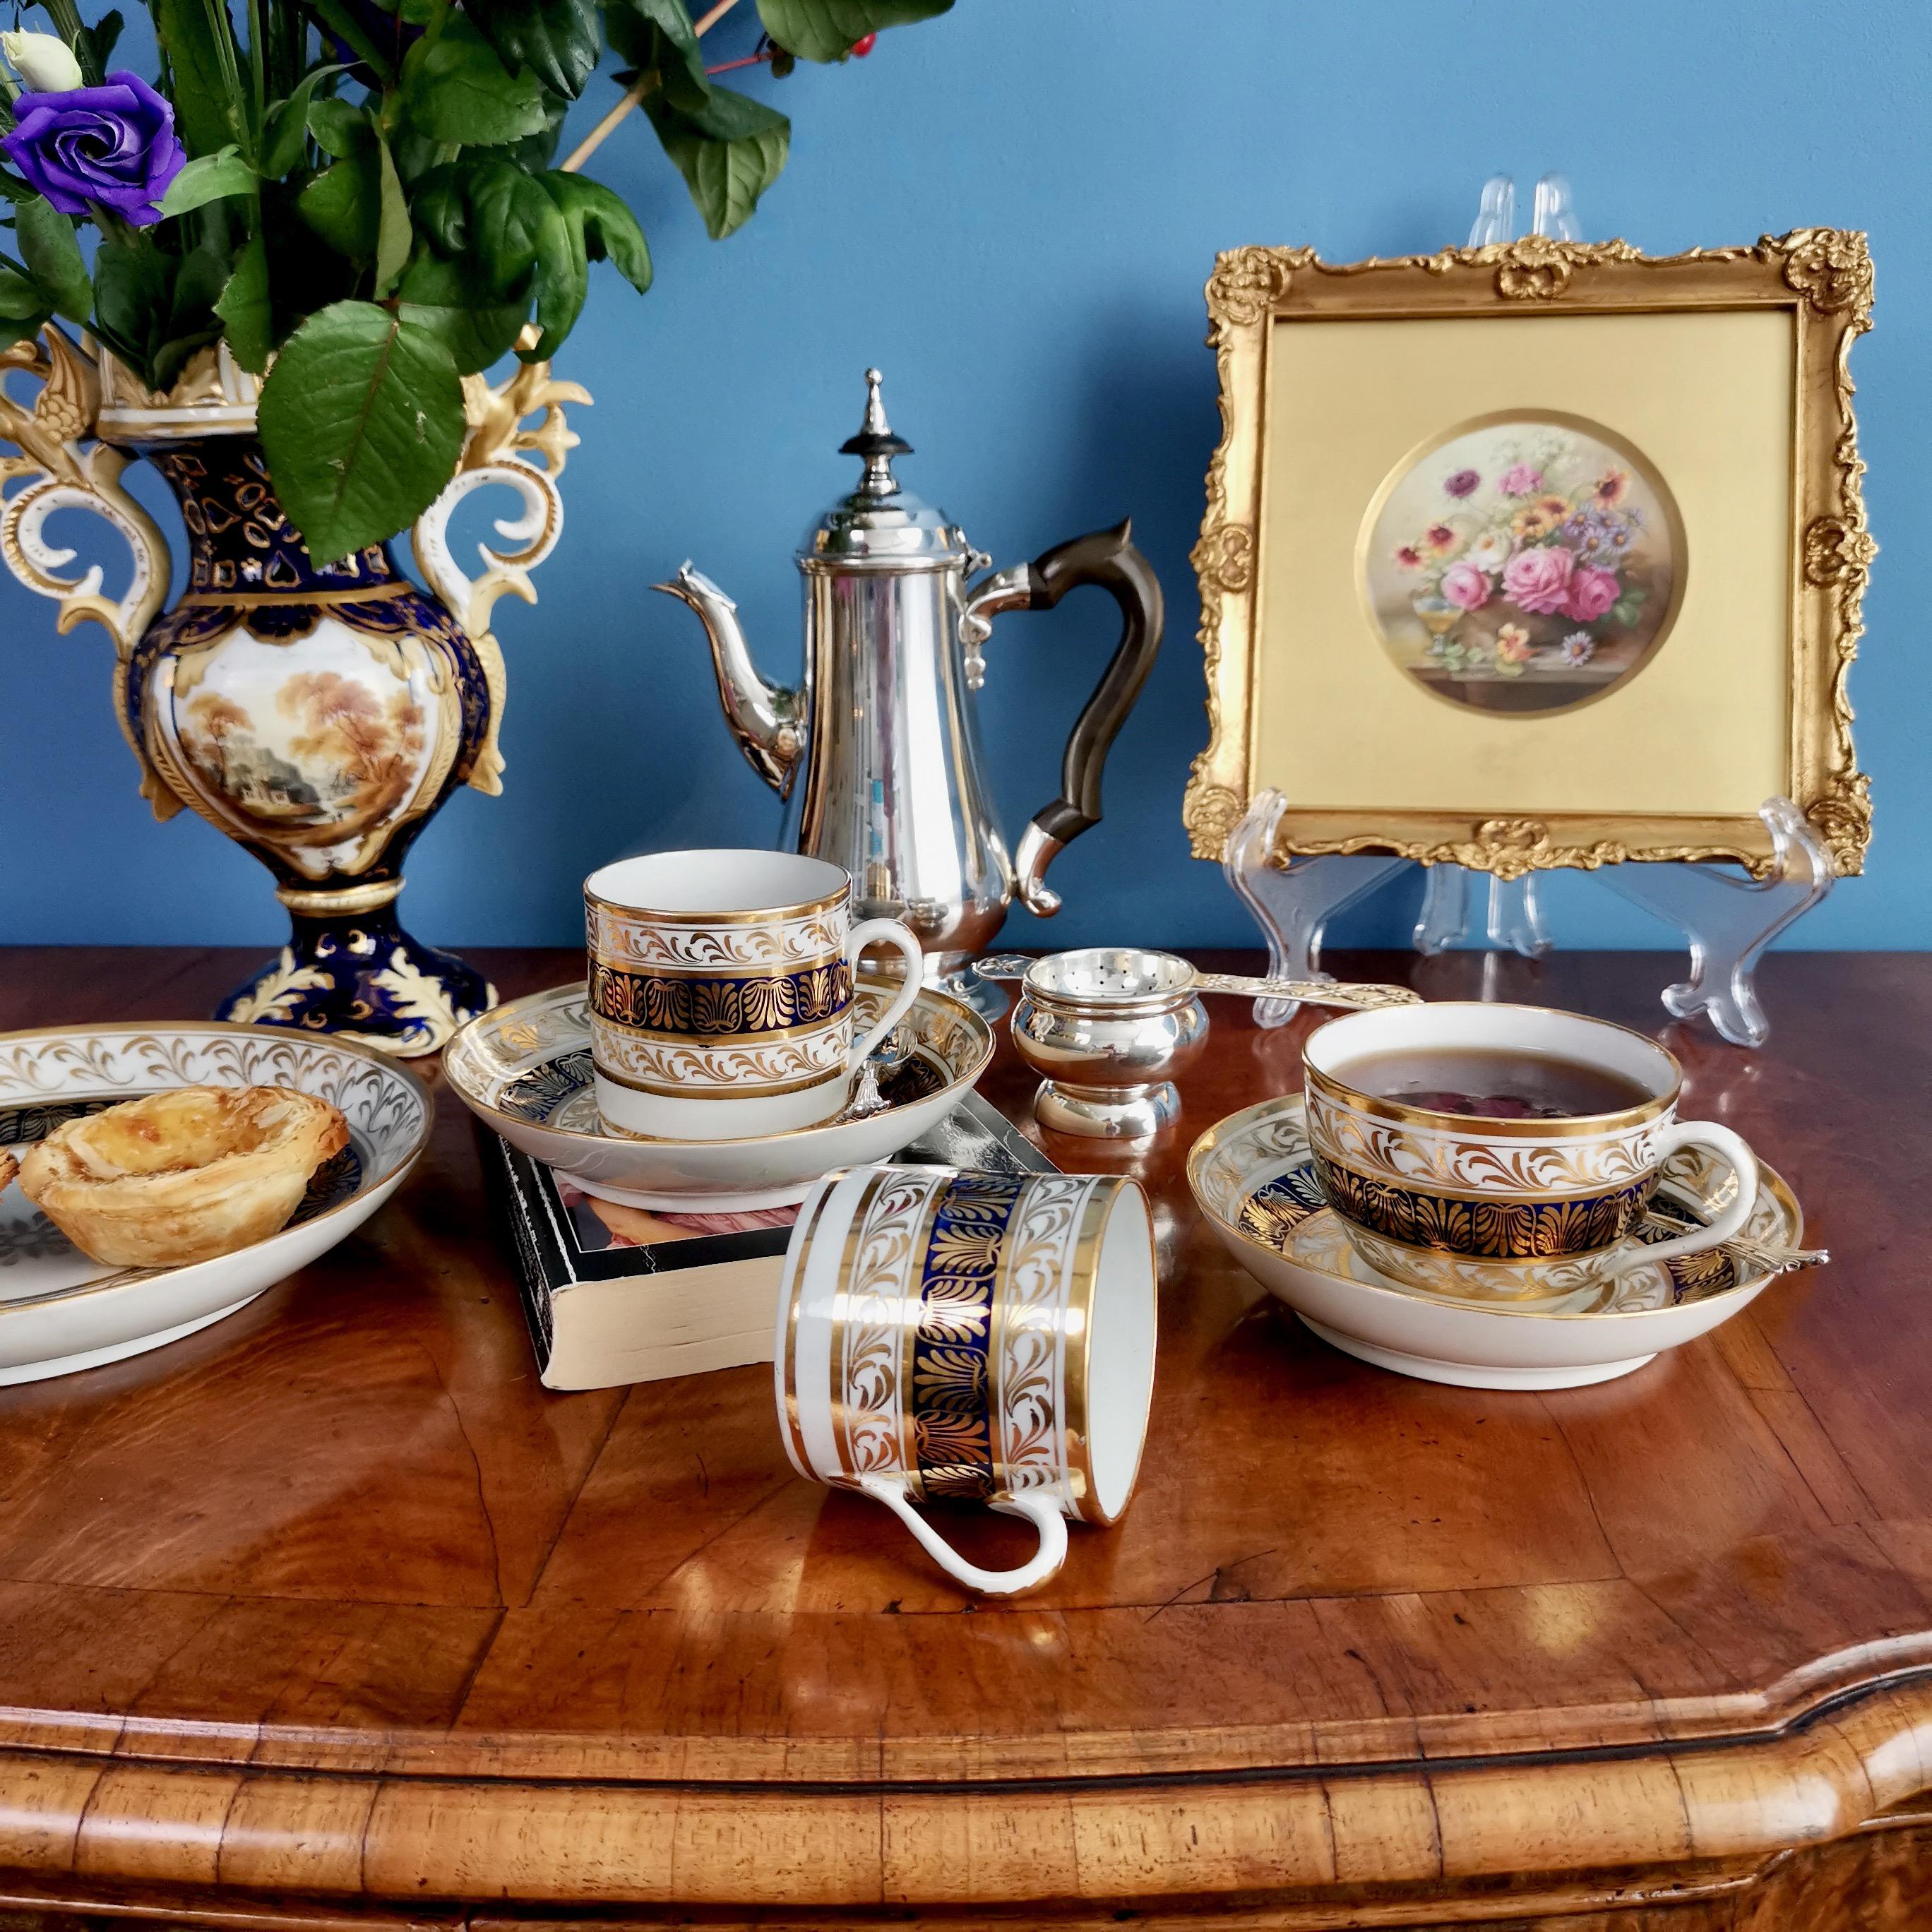 This is a beautiful true trio made by New Hall around the year 1810, consisting of a teacup and a coffee cup sharing one saucer. In the late 18th and early 19th Century this is how cups and saucers were sold; as you would never drink tea and coffee